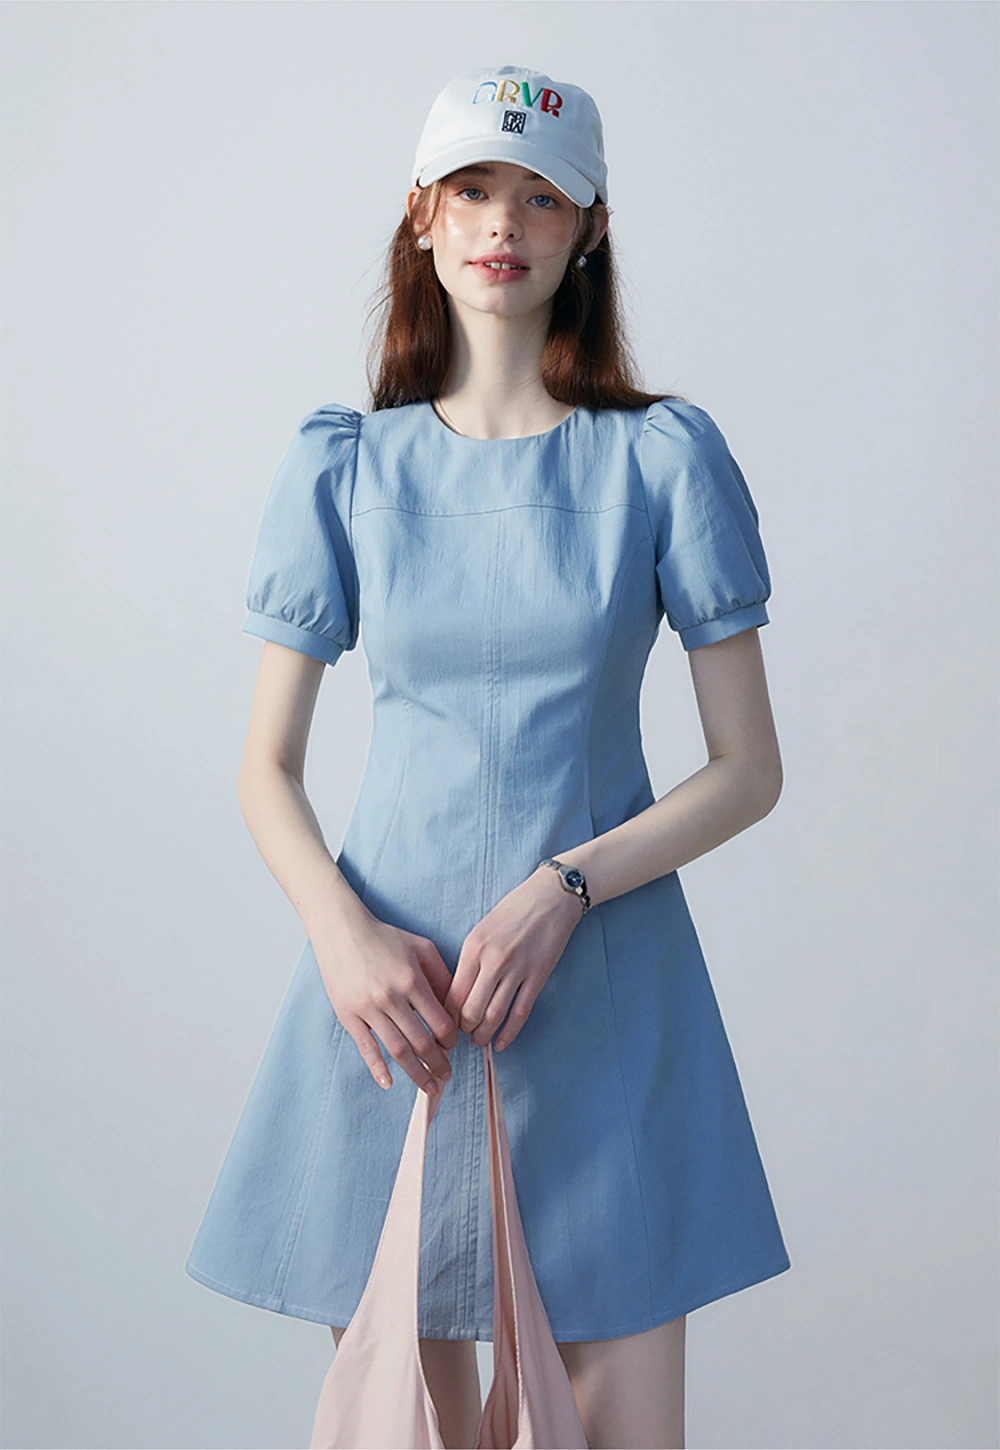 Women's Elegant Blue A-Line Dress with Puffed Sleeves